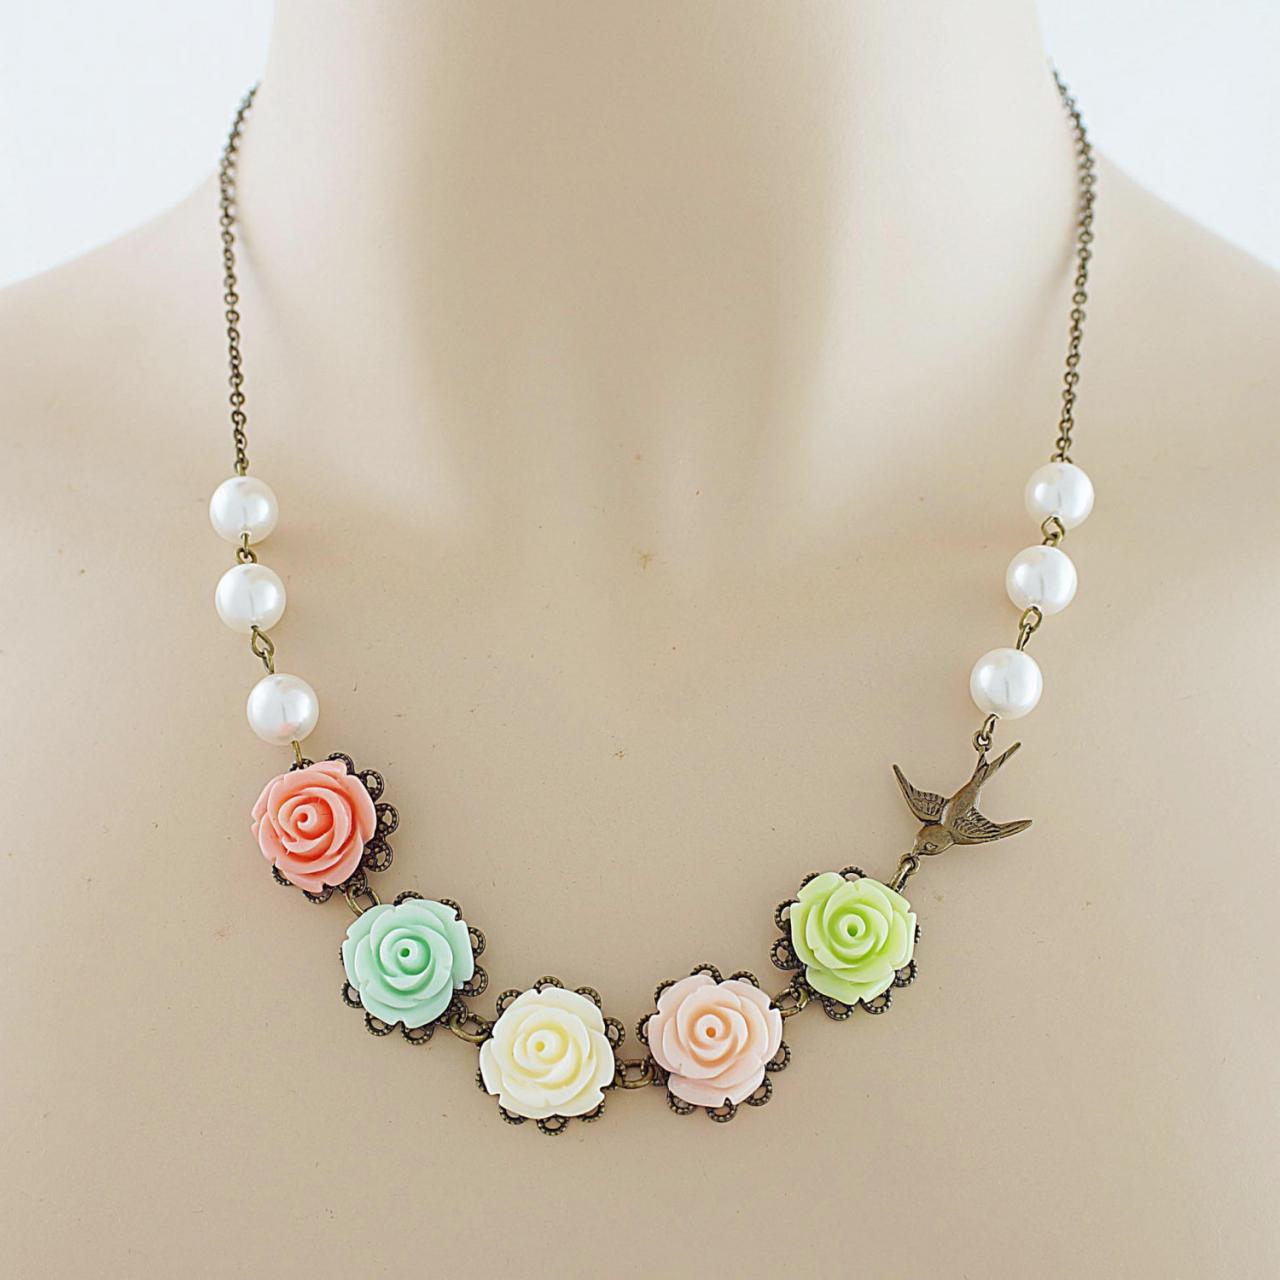 Bridal Necklace Bridesmaid Necklace Garden Of Roses - Colorful Rose Flower Cabochons And Red Bamboo Coral Beads Necklace